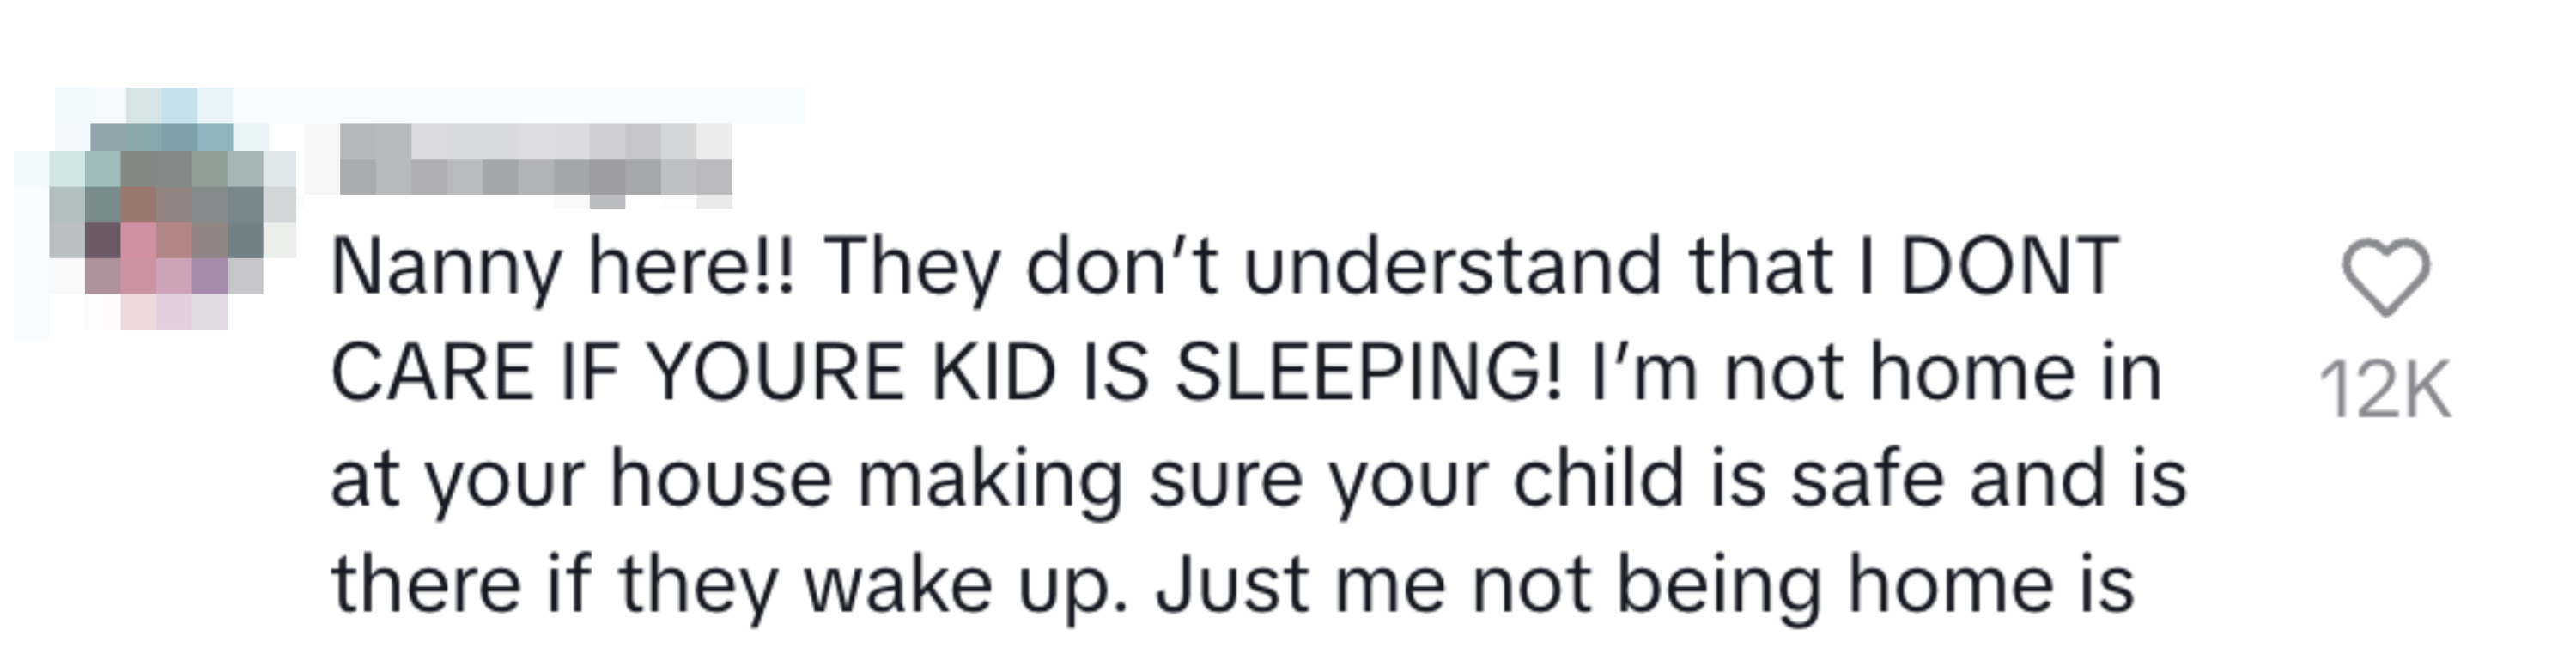 A social media post expressing frustration about others’ expectations of their nanny duties